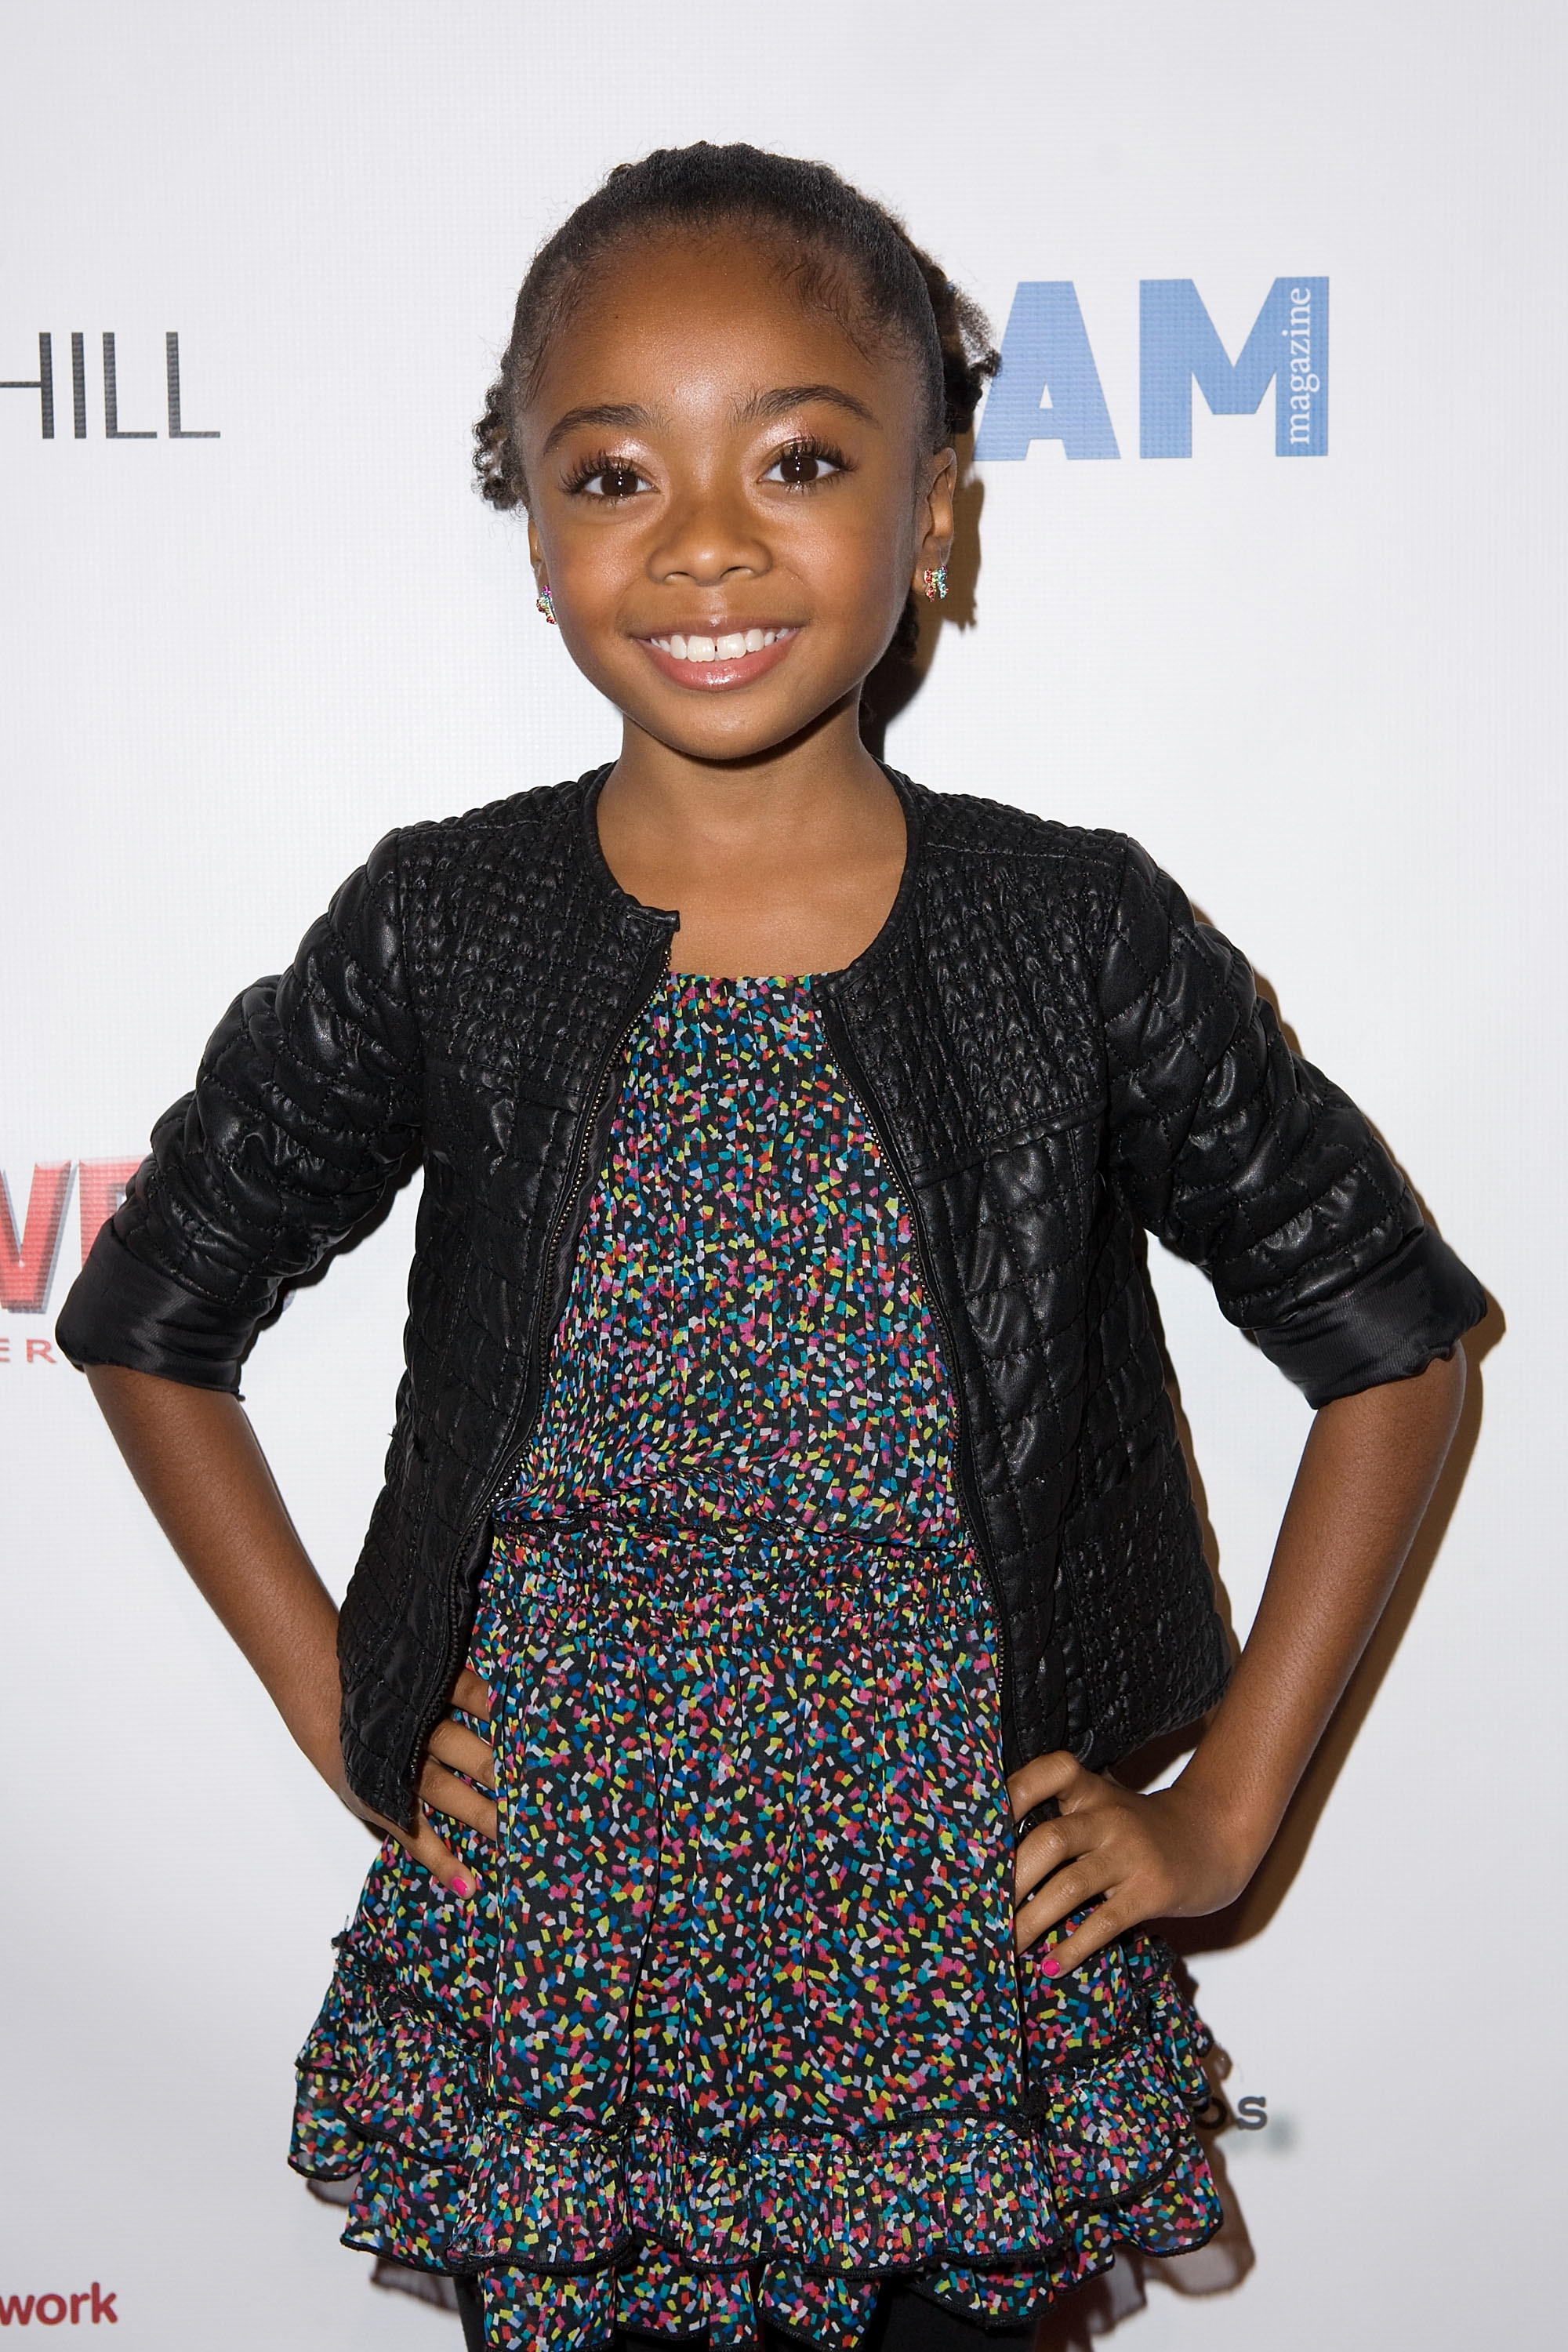 young Skai with her hands on her hips